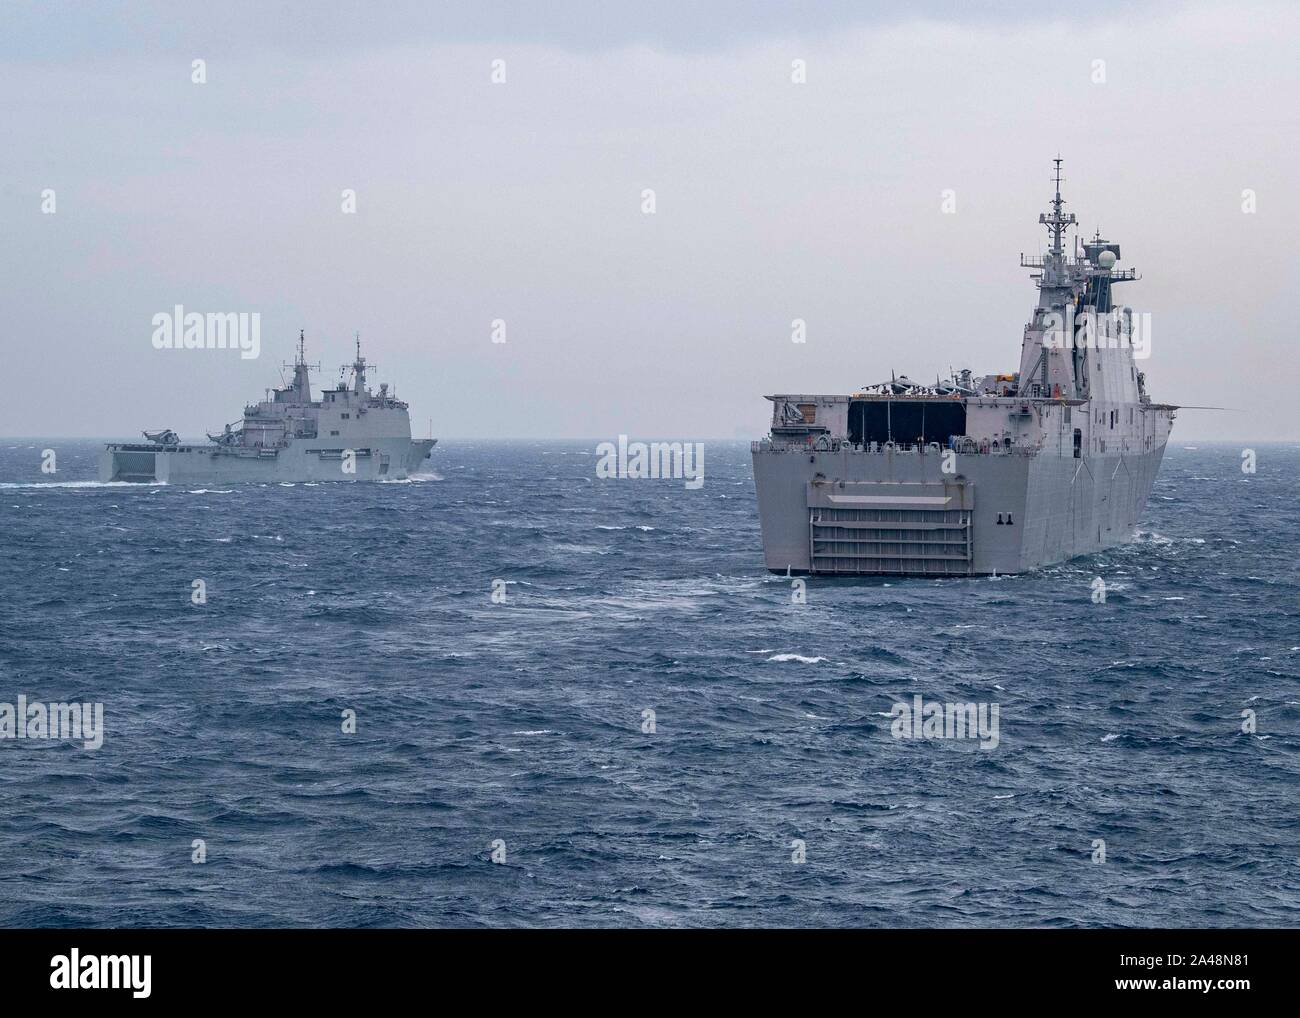 191011-N-UB406-0197  GULF OF CADIZ (Oct. 11, 2019) The Spanish navy amphibious assault ship-aircraft carrier ESPS Juan Carlos (L-61), right, and the Spanish navy replenishment oiler ESPS Cantabria (A 15), left, transit the Gulf of Cadiz with NATO Allied forces as part of exercise Dynamic Mariner 2019 as seen from the U.S. Navy guided-missile destroyer USS Gridley (DDG 101). The NATO Maritime Command-led Dynamic Mariner/Flotex 19 (DYMR/FL19) is an exercise that tests NATO's Response Force Maritime Component and enhances the flexibility and interoperability amongst Allied nations. DYMR/FL19 invo Stock Photo